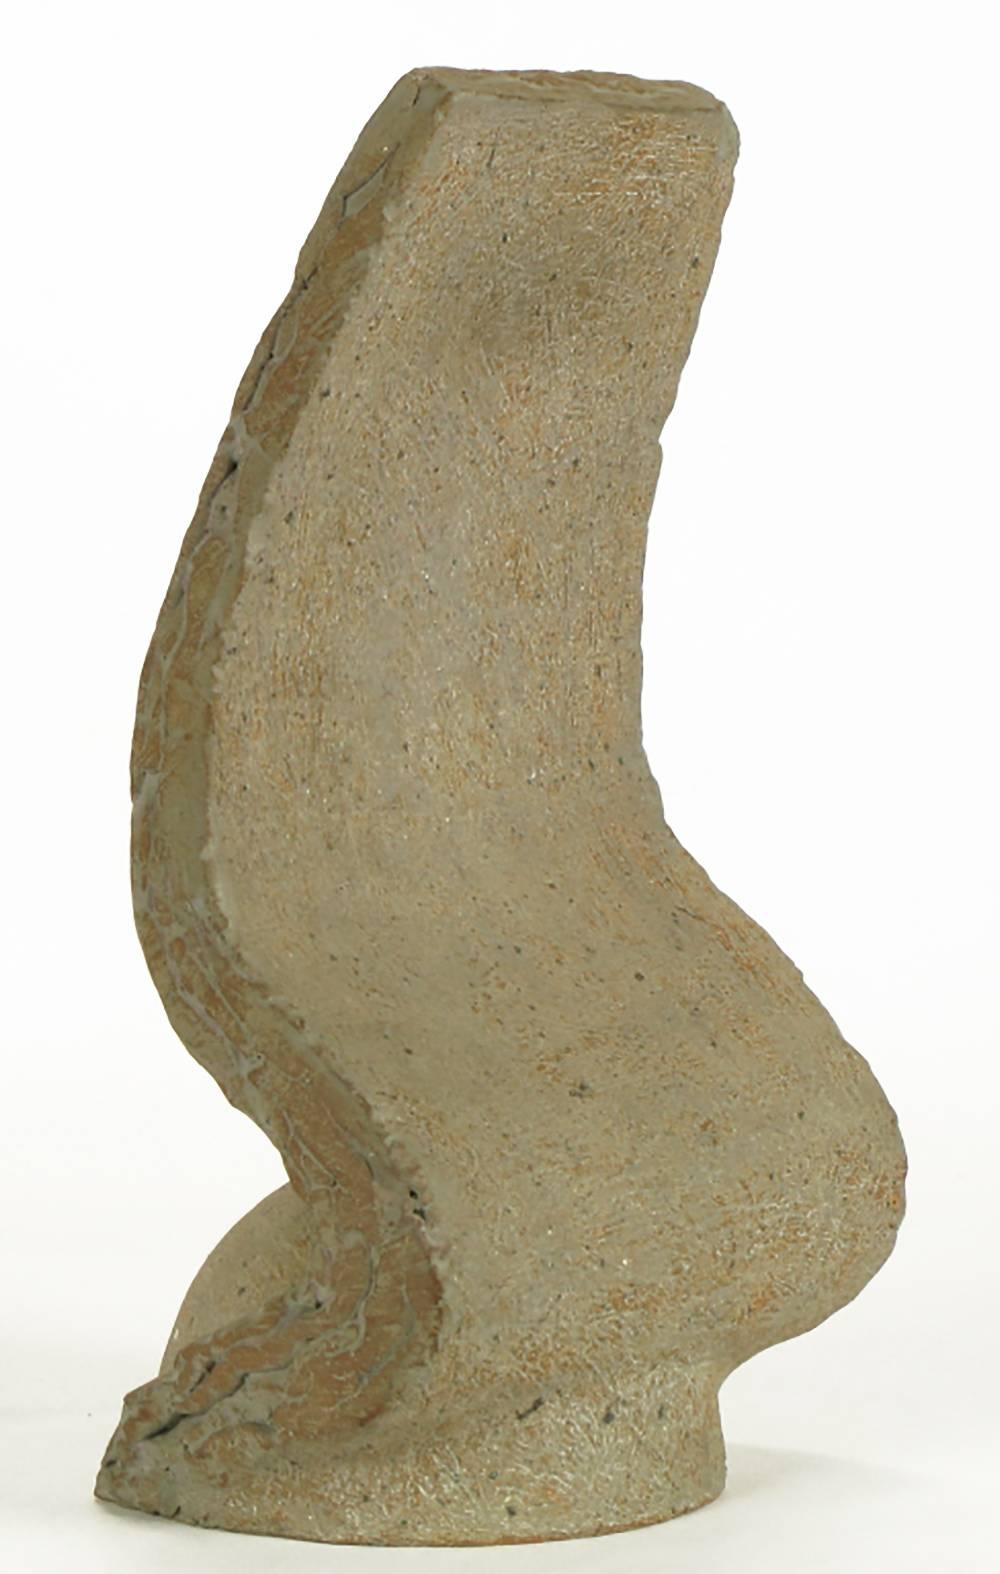 Tomiya Matsuda Sinuous Modern Ceramic Sculpture In Excellent Condition For Sale In Chicago, IL